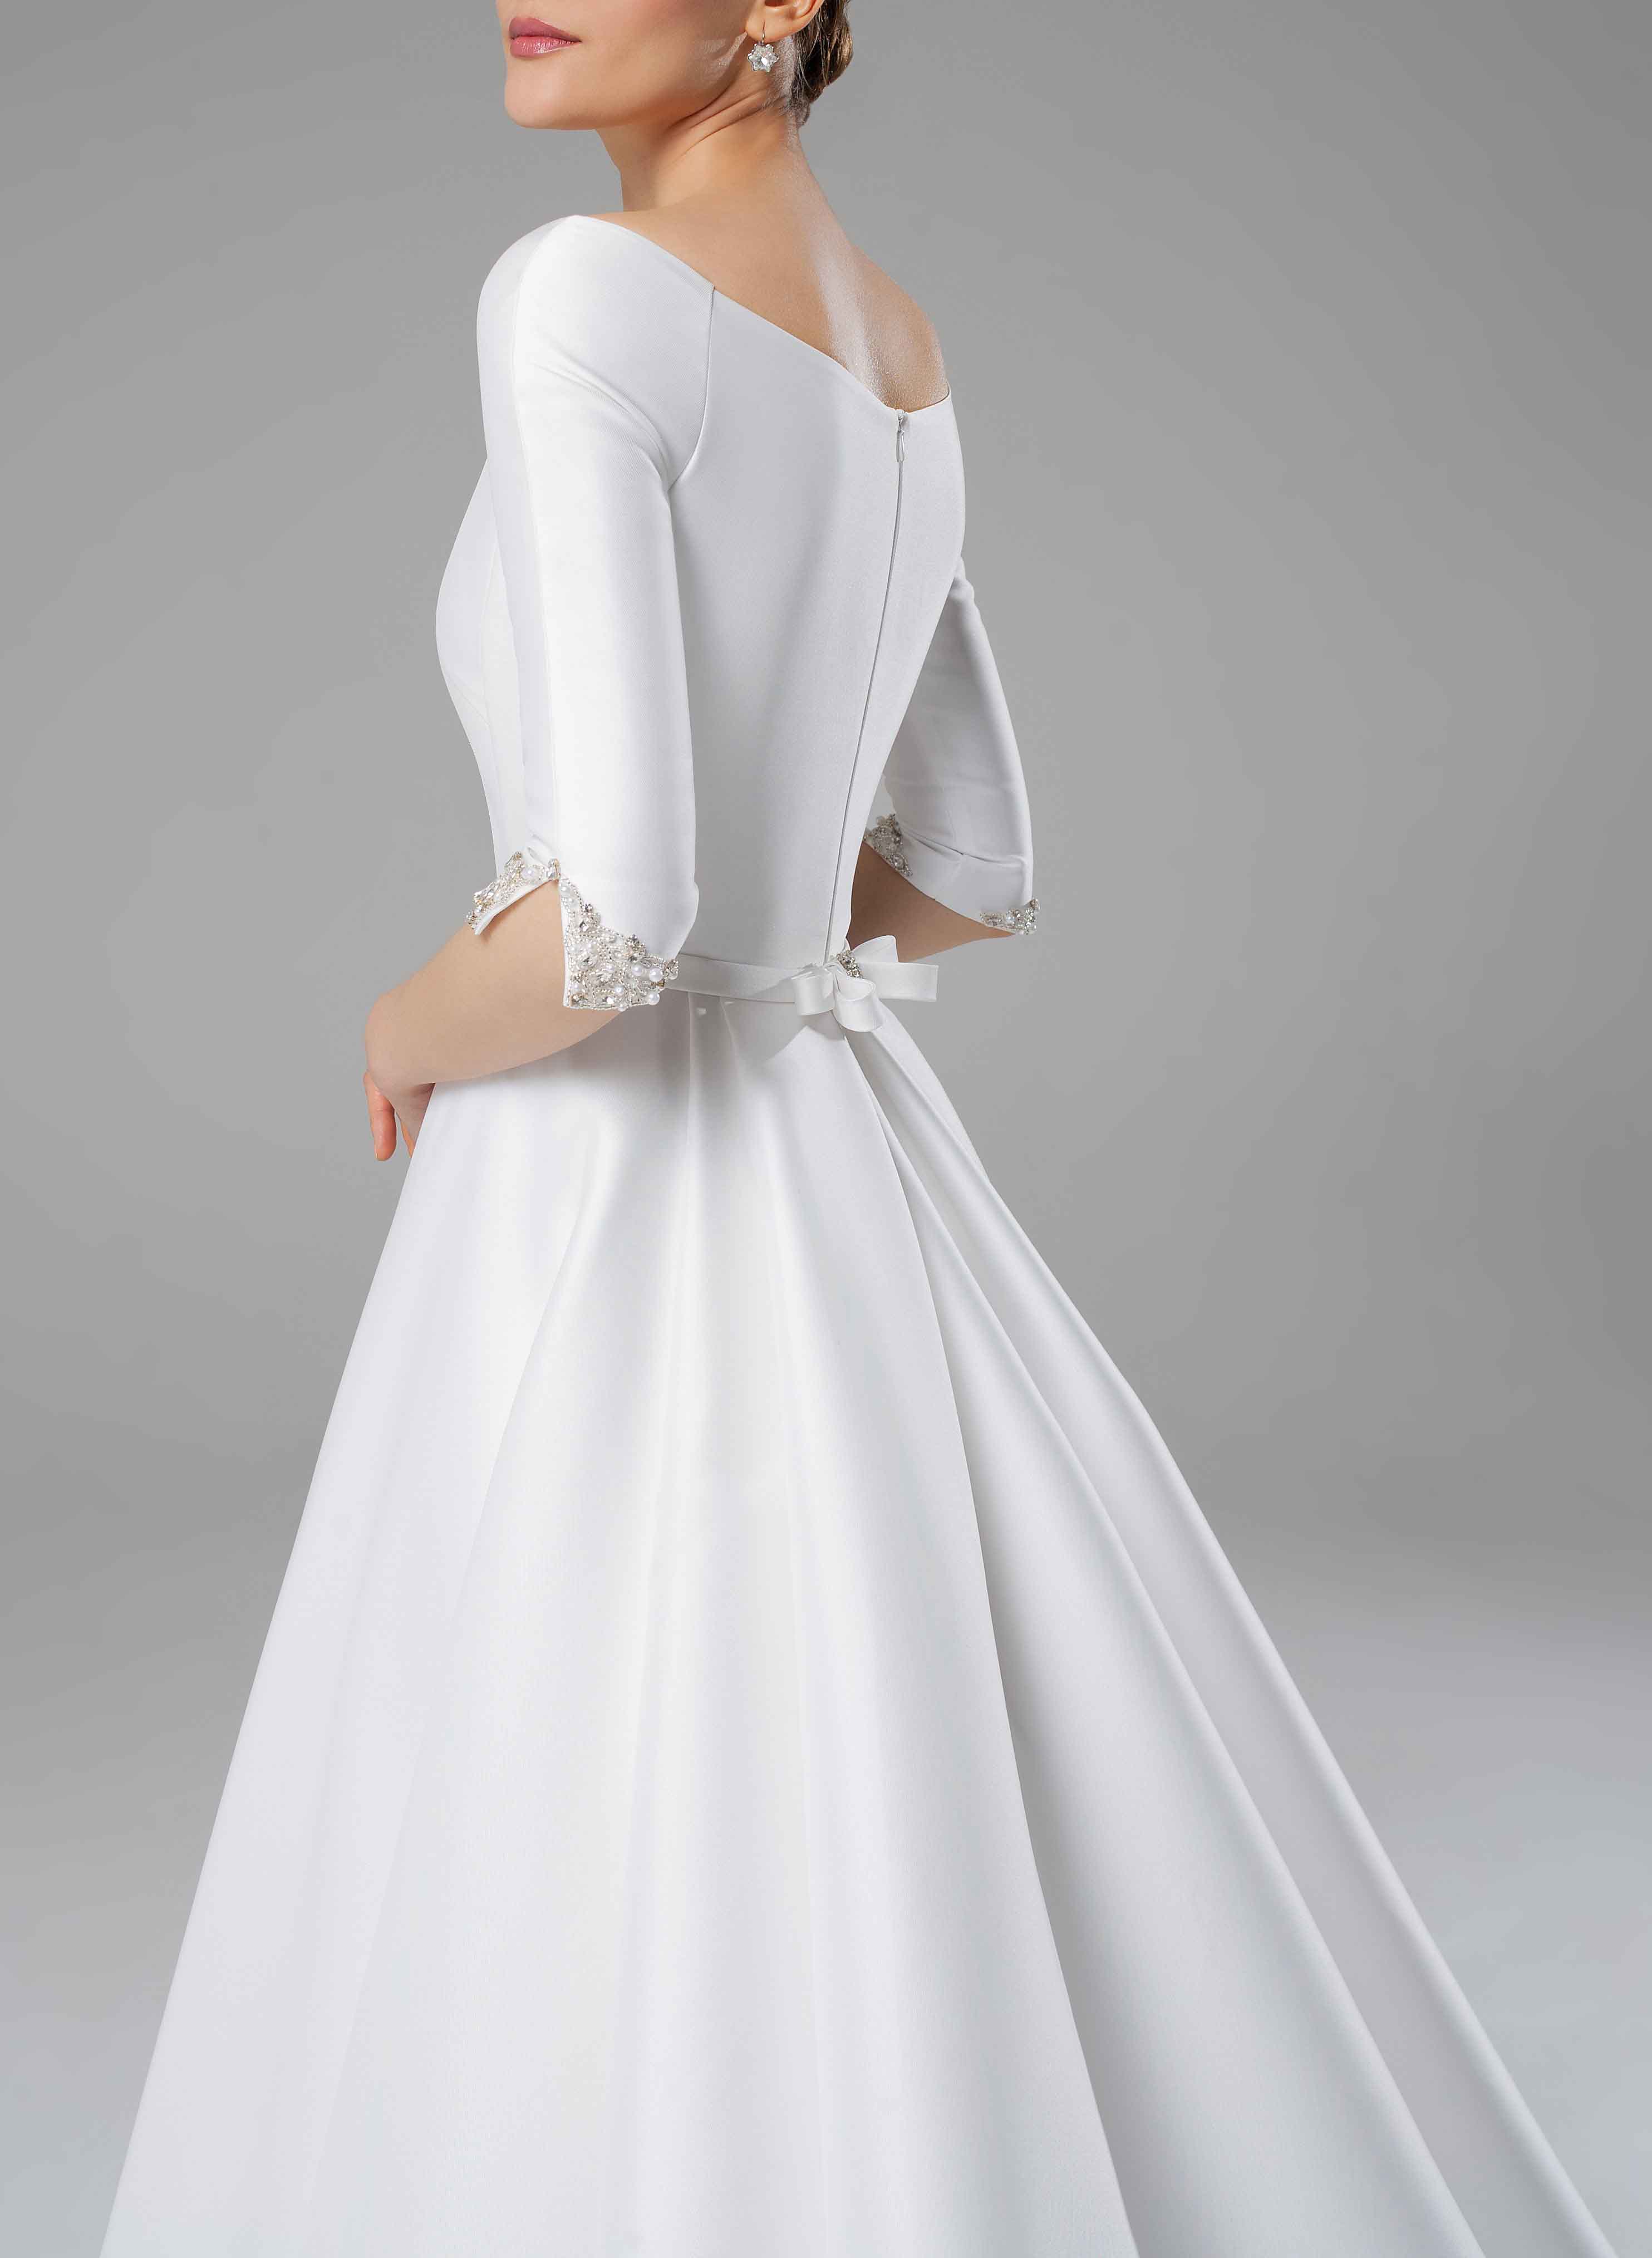 Classic Satin Ball-Gown Wedding Dresses With Beading